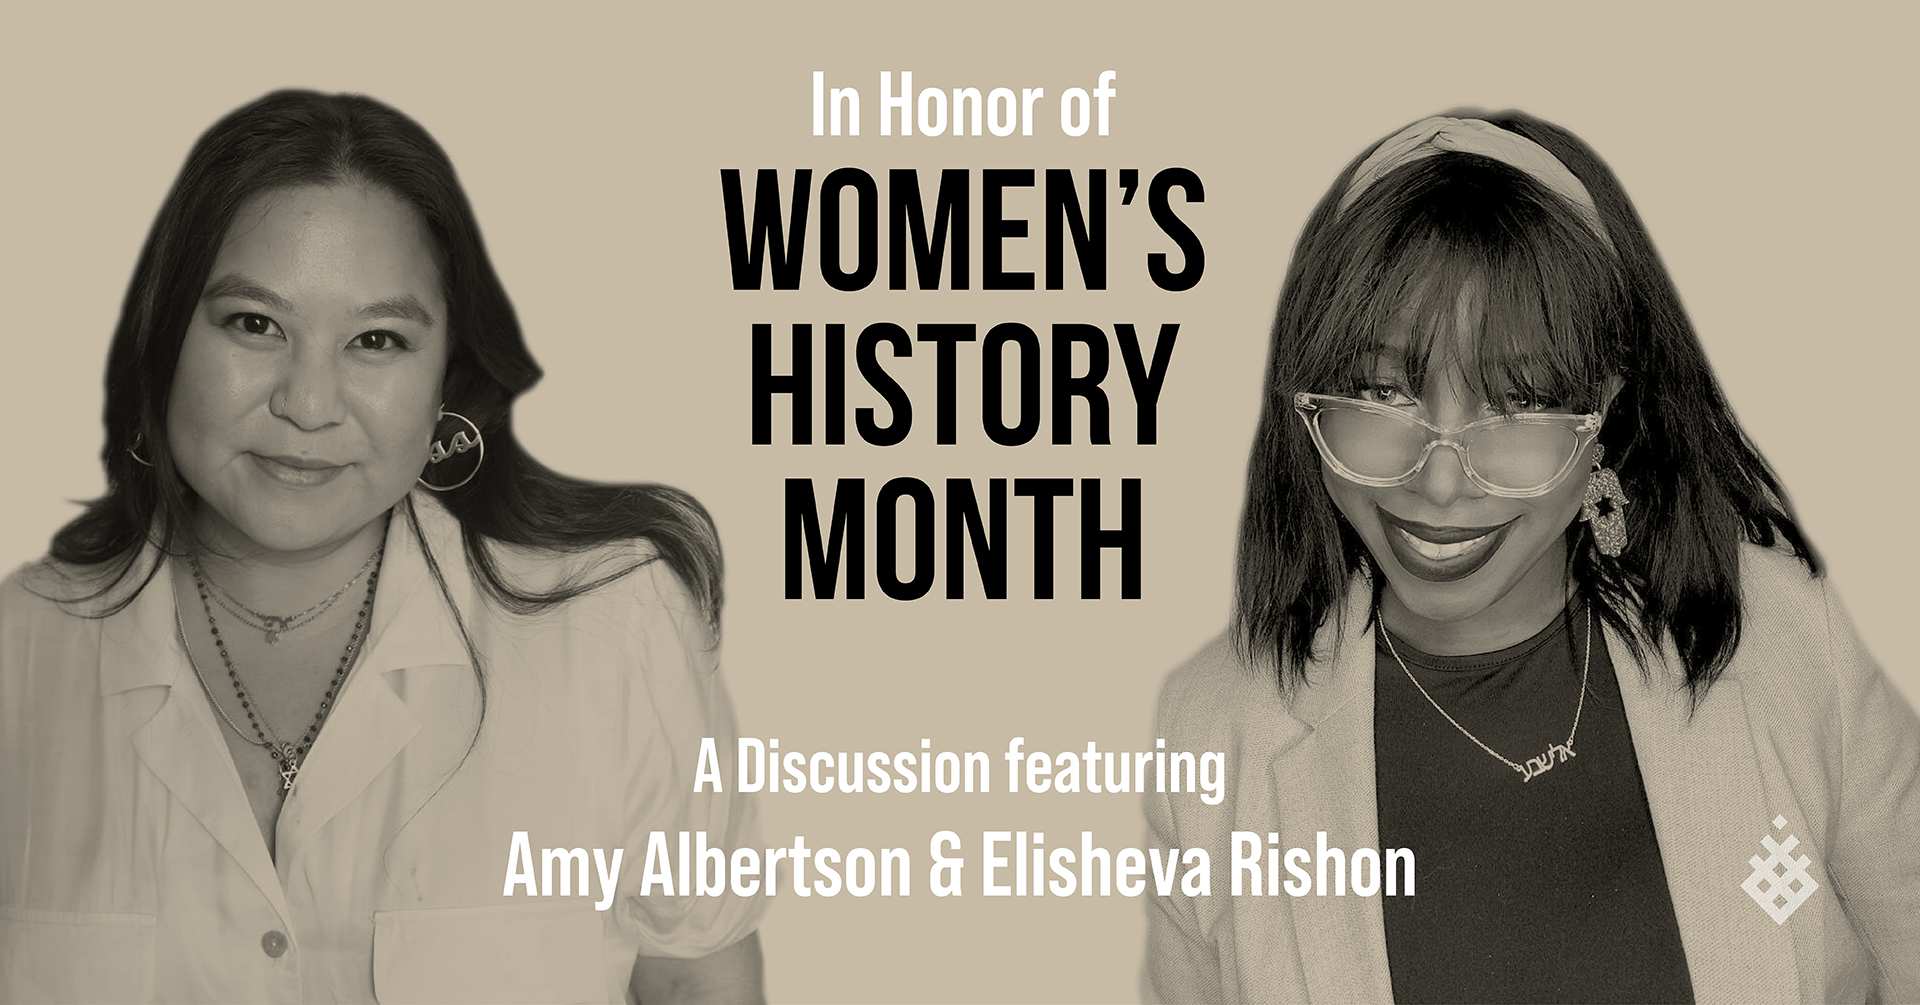 The Jewish Federation's Jewish Community Relations Council Celebrates Women's History Month